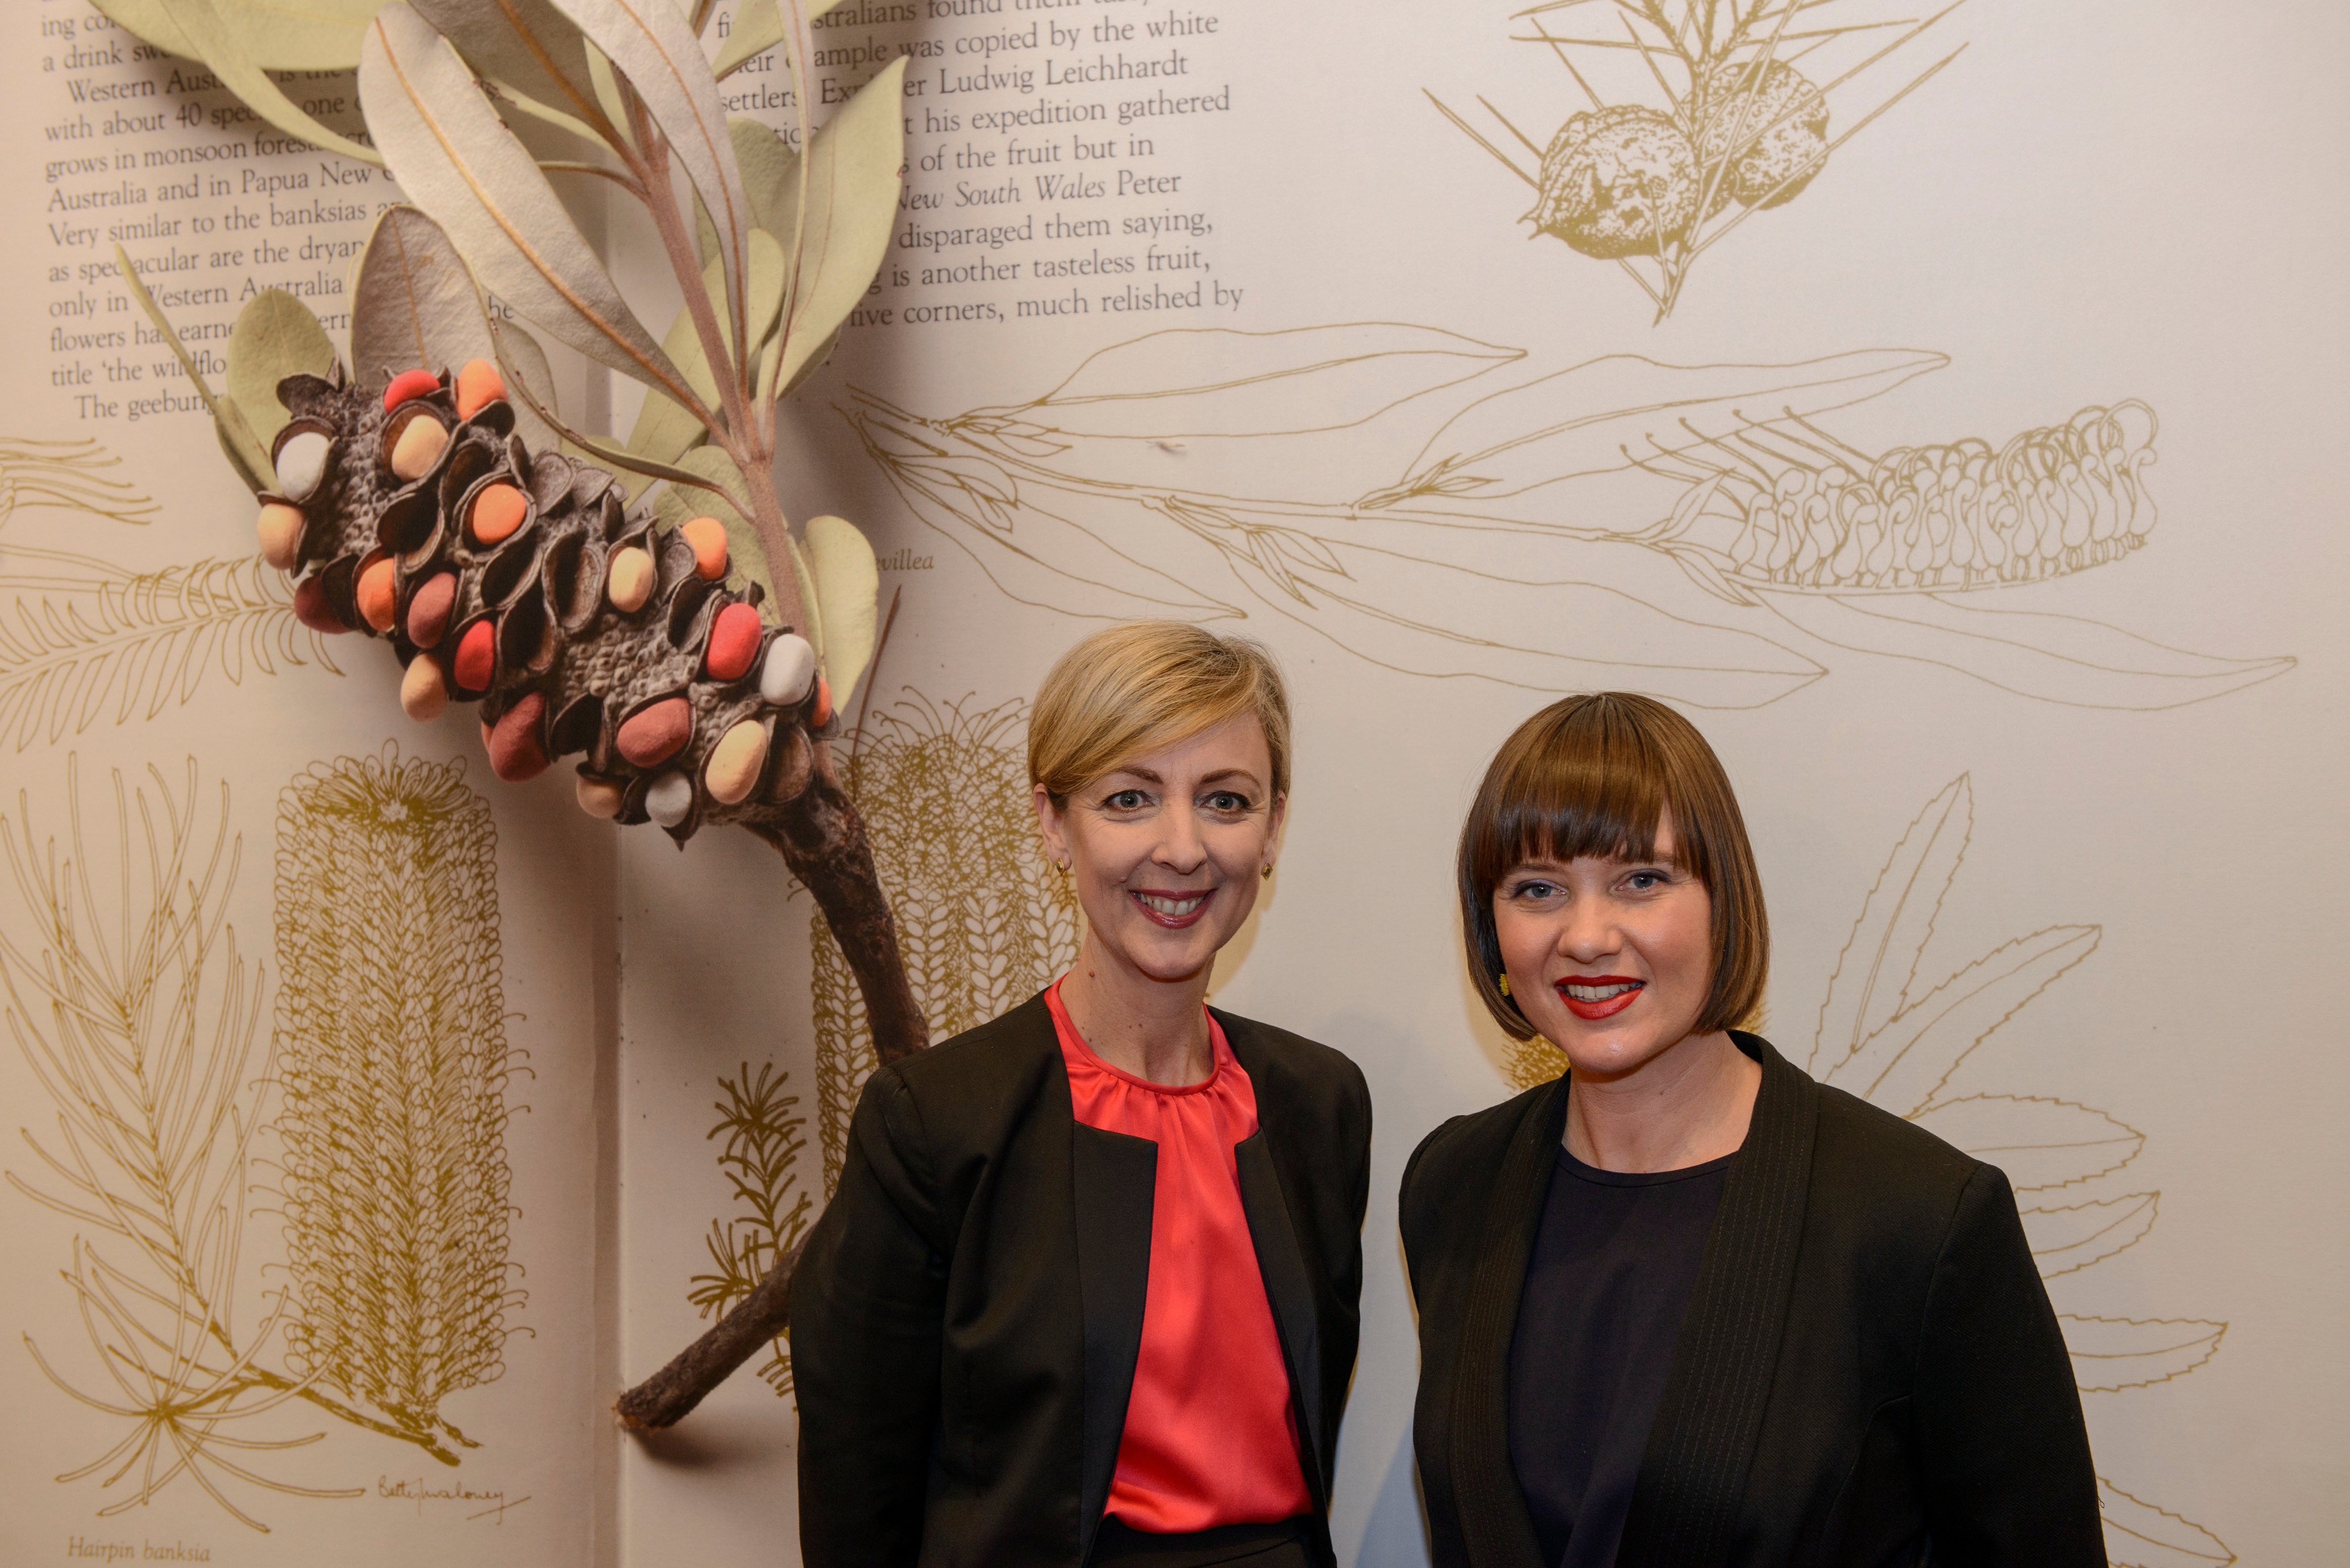 State Library Victoria CEO, Kate Torney and artist Tai Snaith in front of a large book